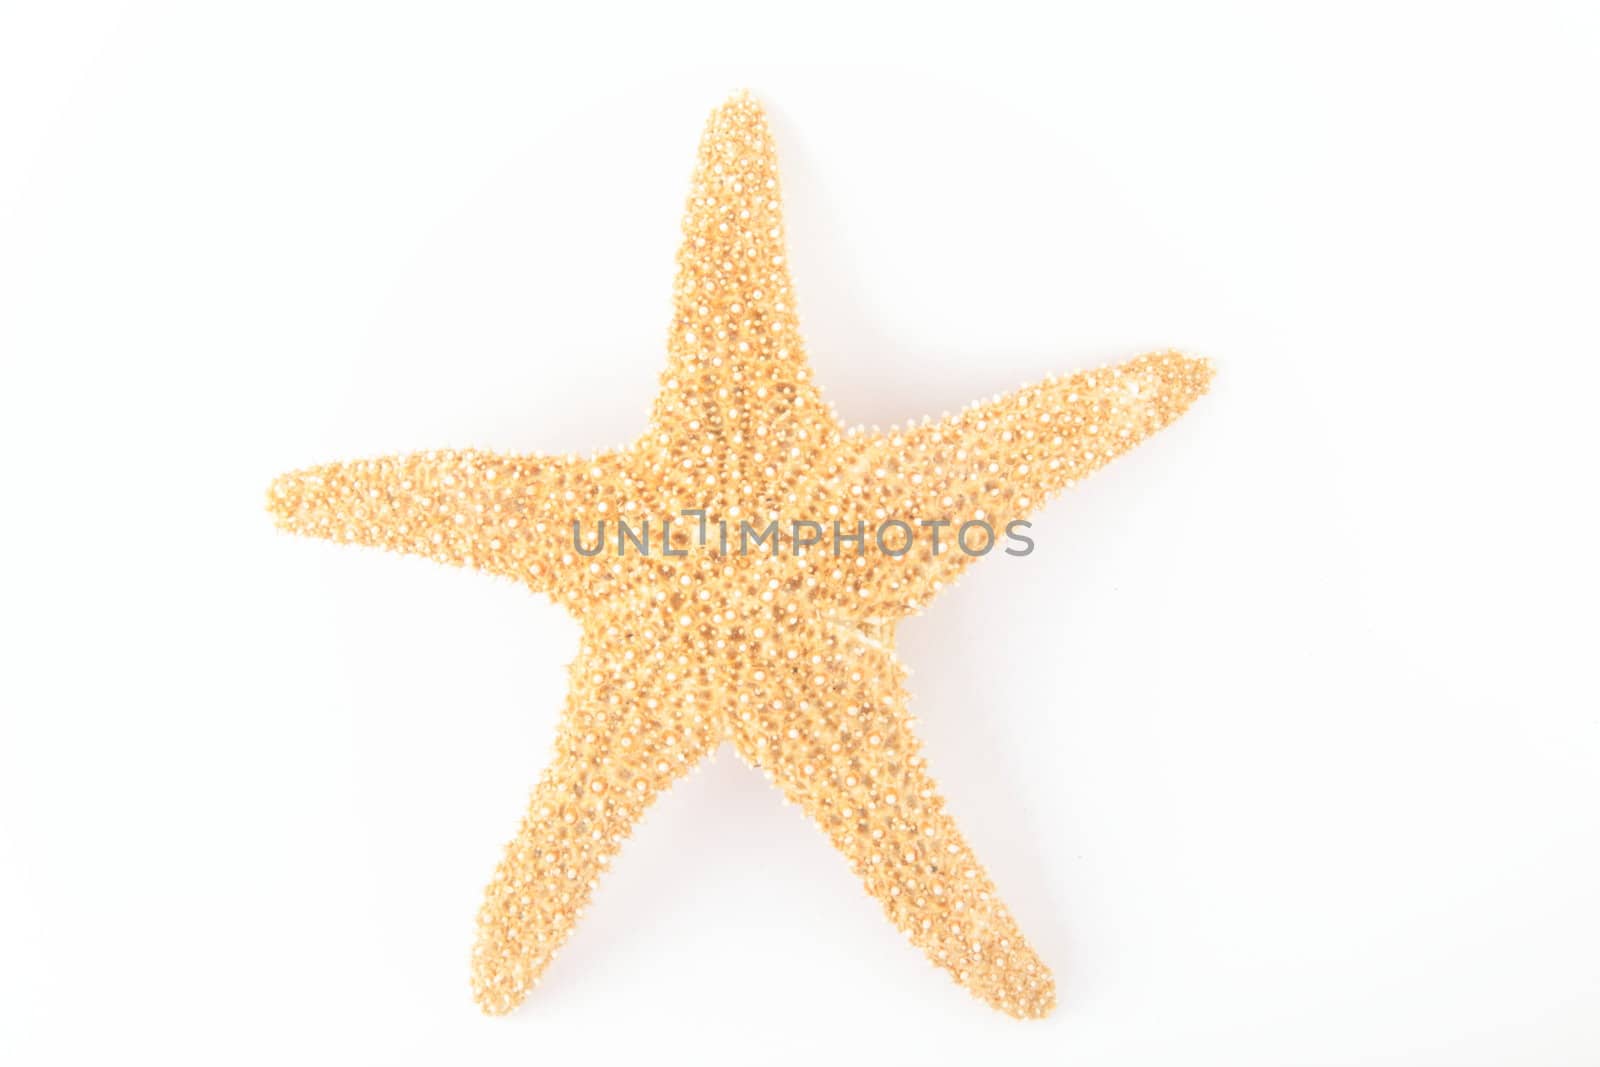 Starfish from oceans by shutswis